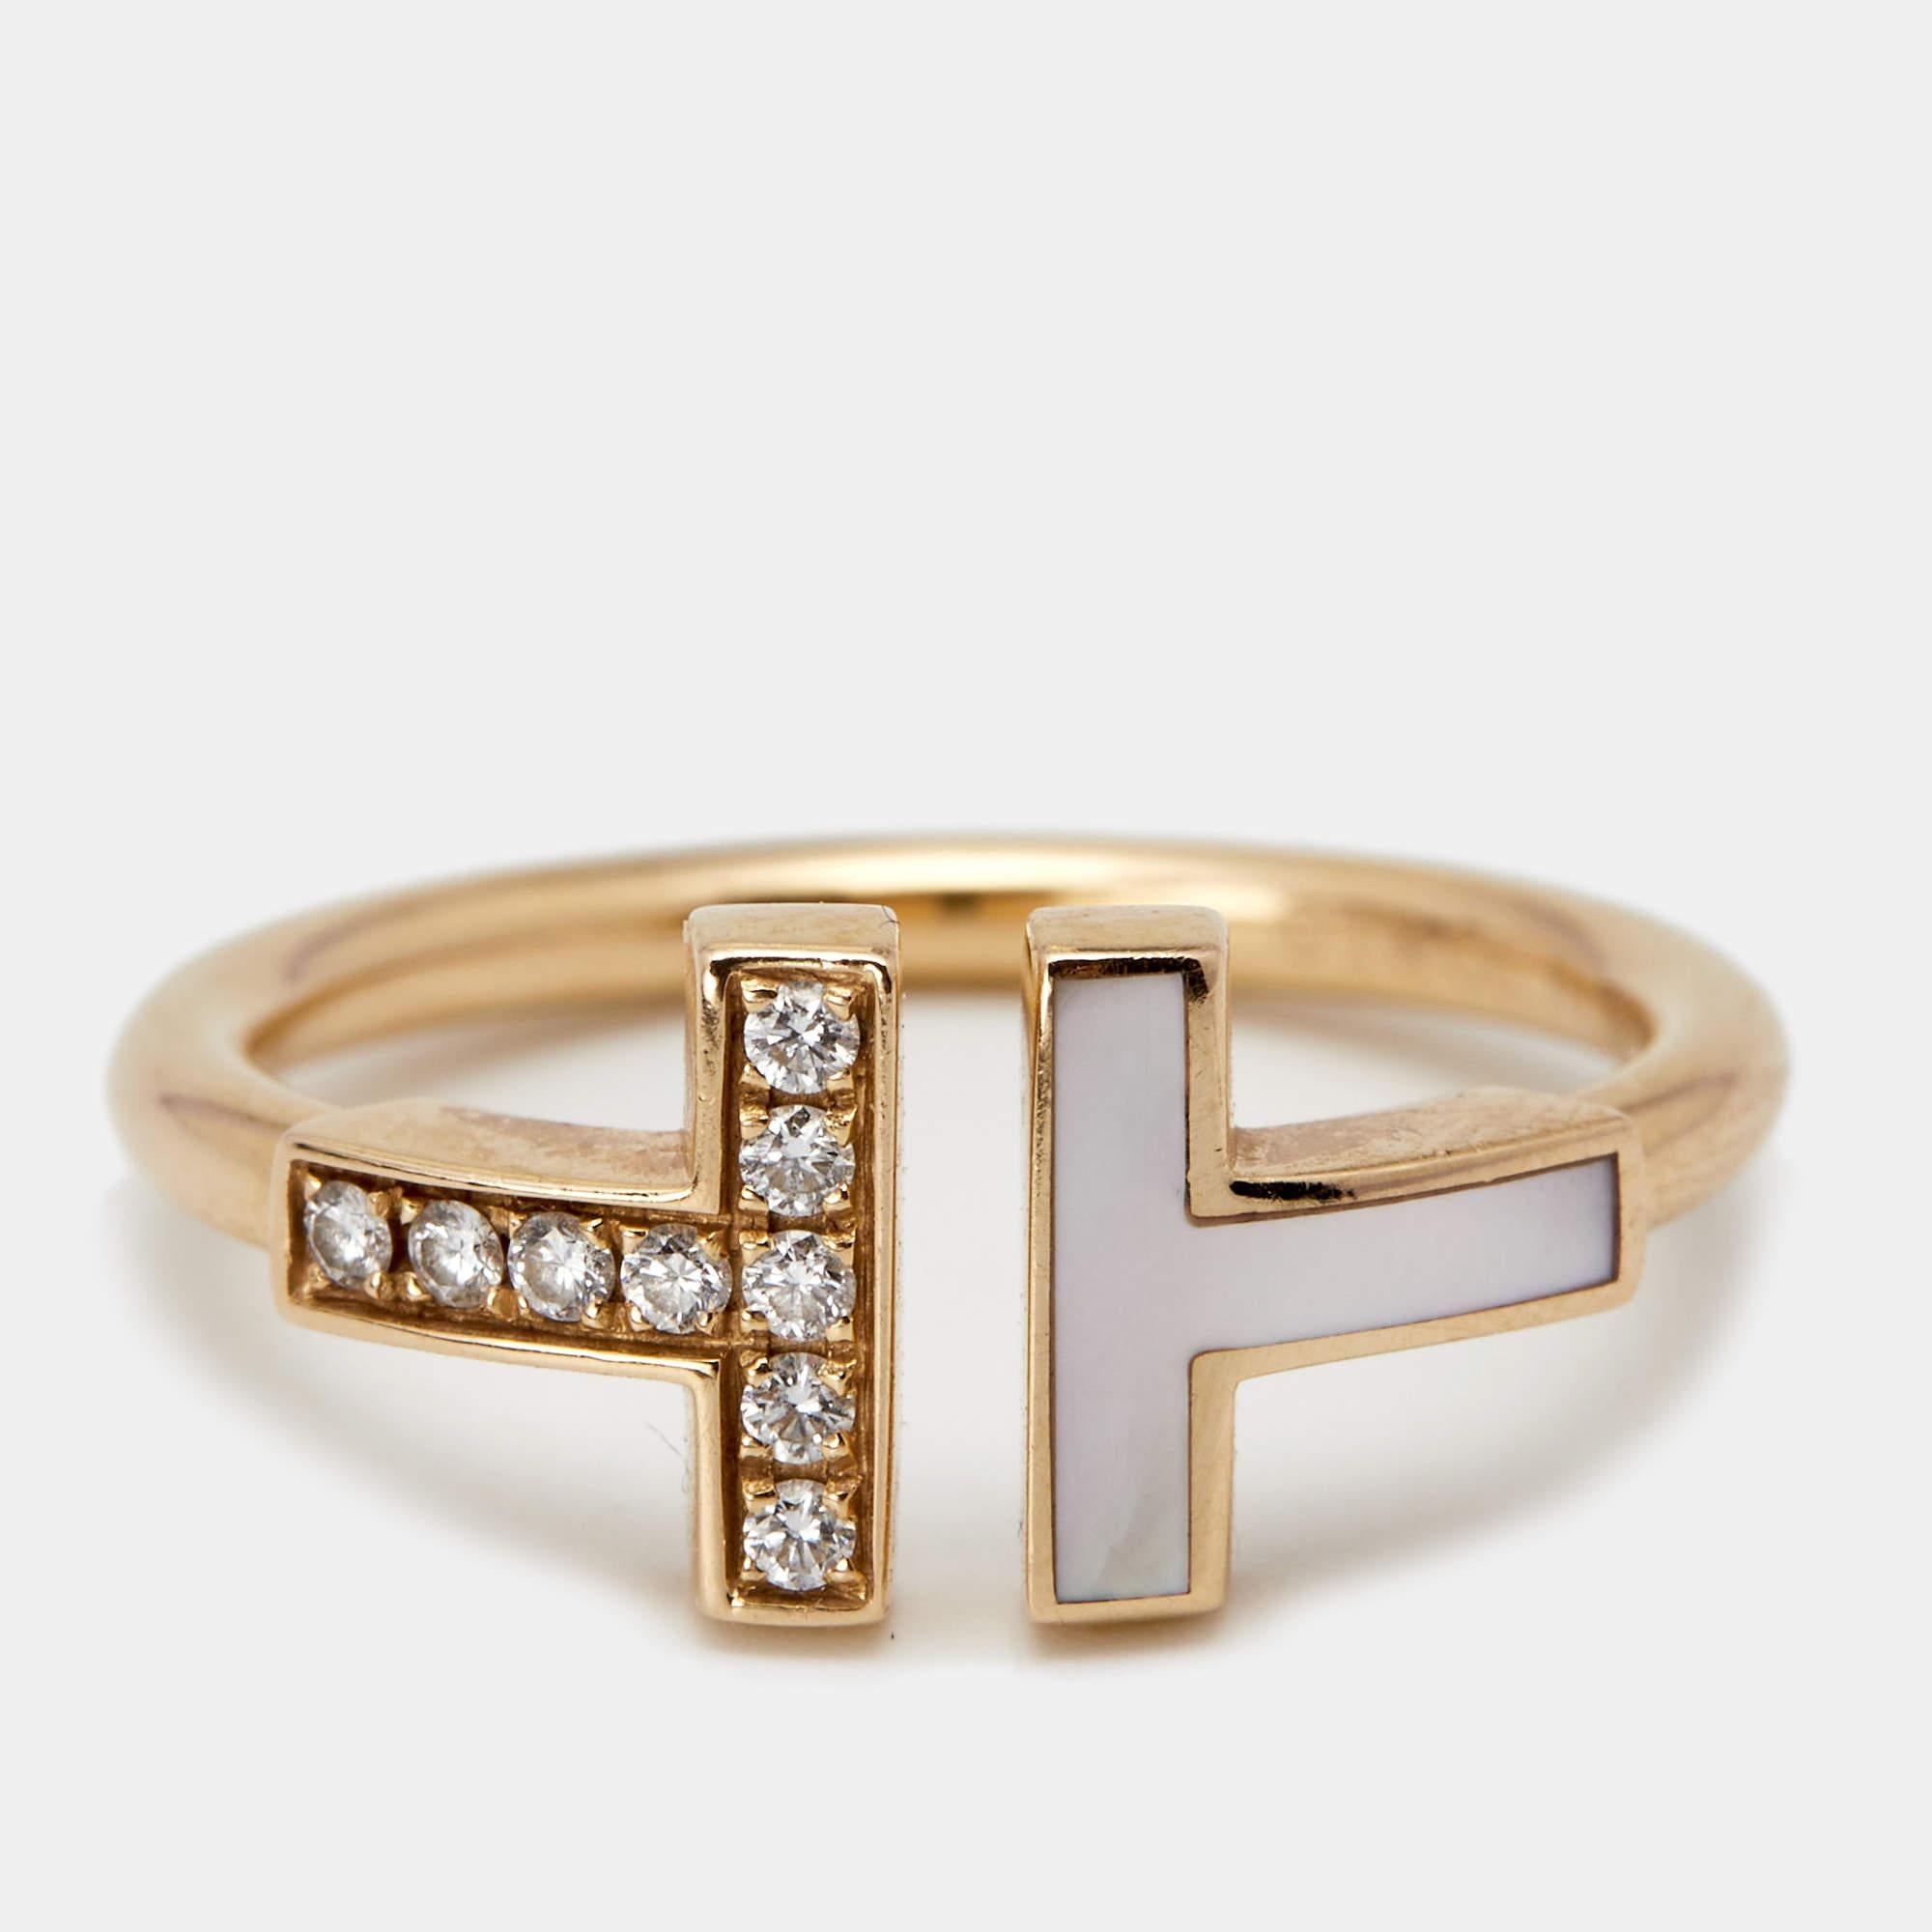 Luxury and fine skill take the front stage with this beautiful ring from Tiffany & Co. Carved using 18k rose-gold metal, this intricate T-Wire creation is encrusted with diamonds and Mother of Pearl gemstone. This sleek accessory makes the perfect